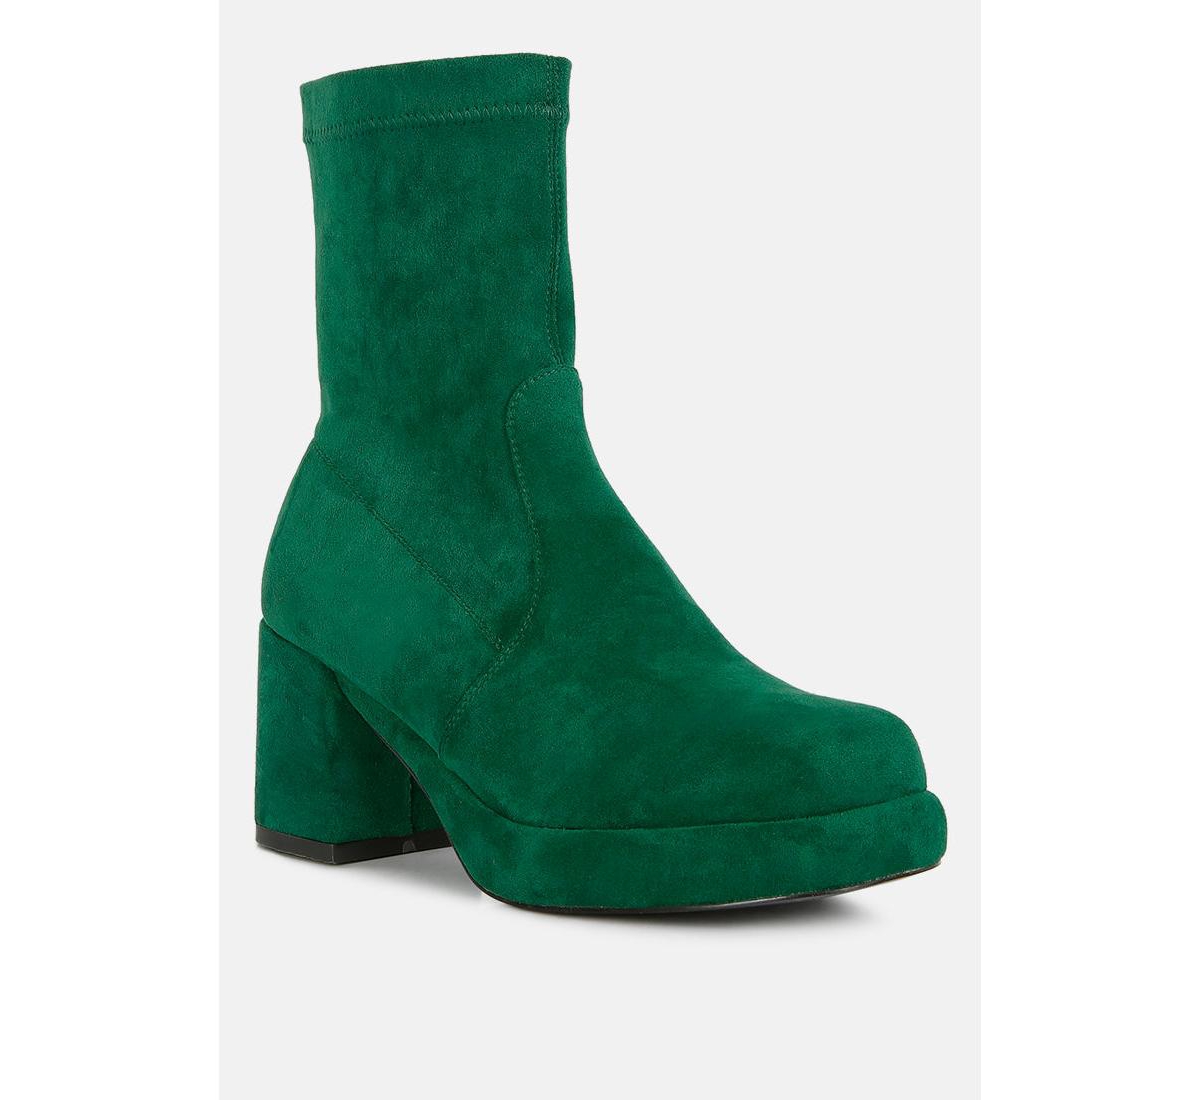 Two-cubes Womens Suede Platform Ankle Boots - Dark green